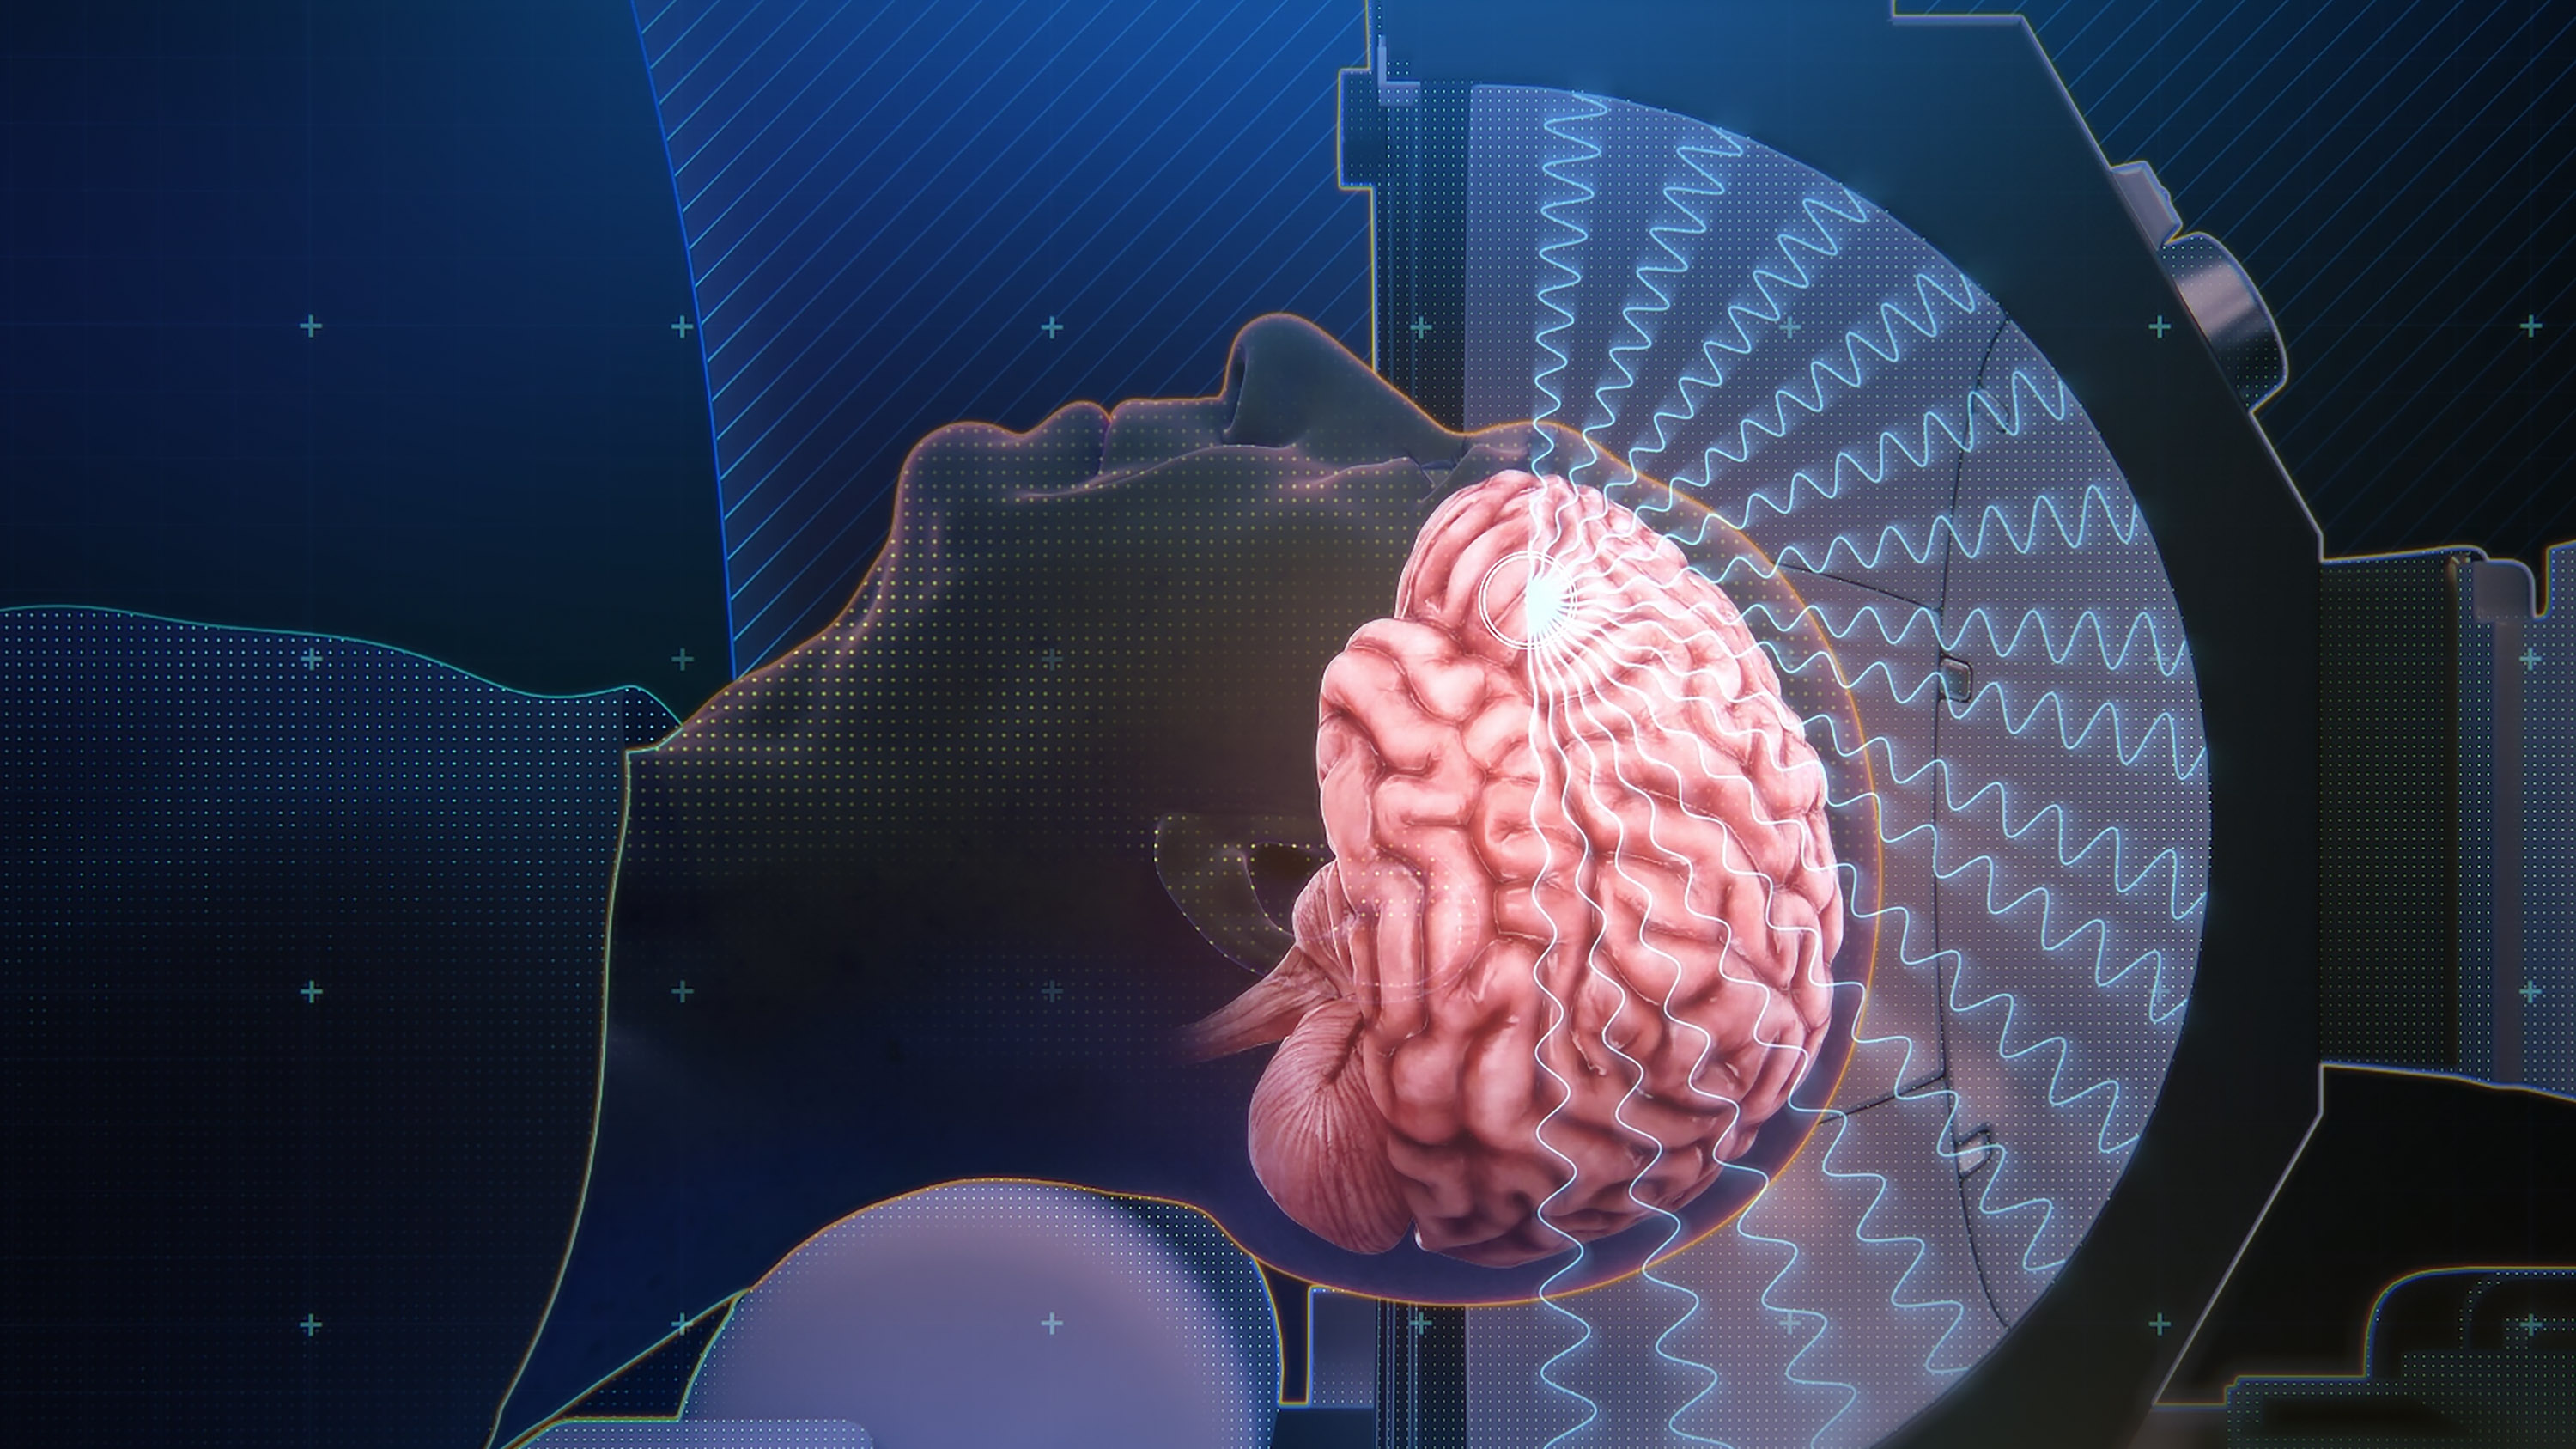 a patient rendered in profile with brain image superimposed on their head which is partially inside a machine. Wavy lines representing ultrasound waves radiate onto the brain from the half-circle interior of the machine